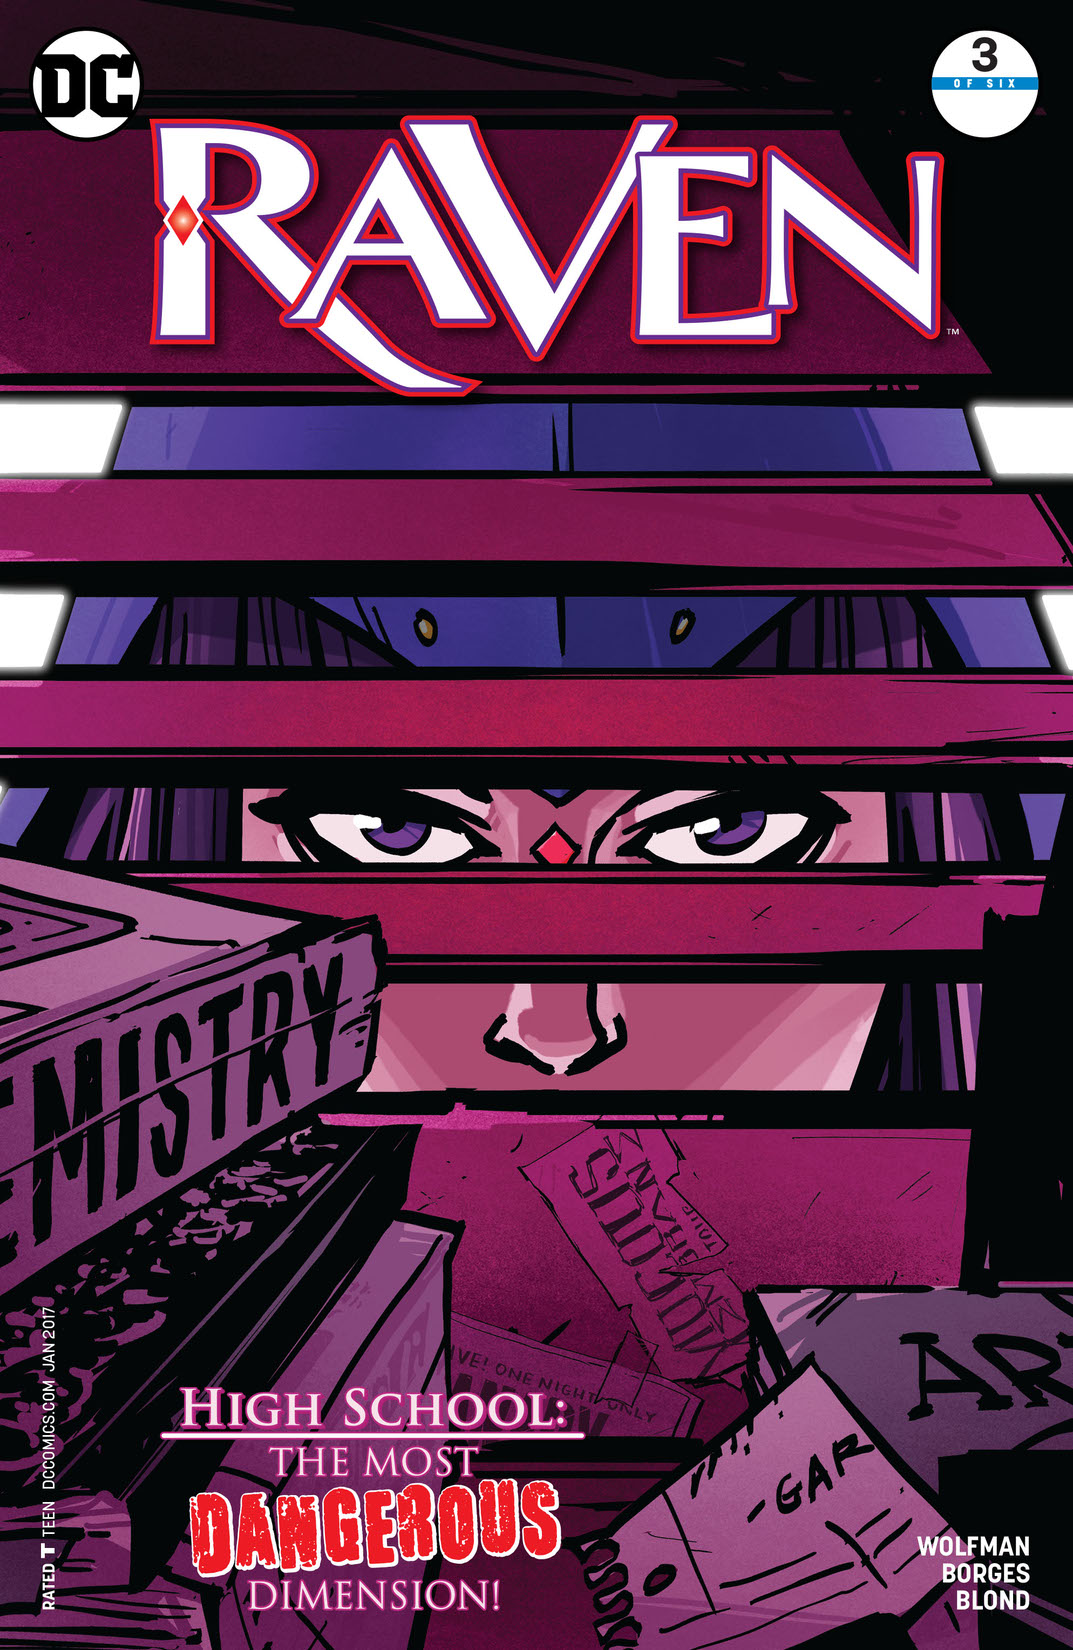 Raven #3 preview images